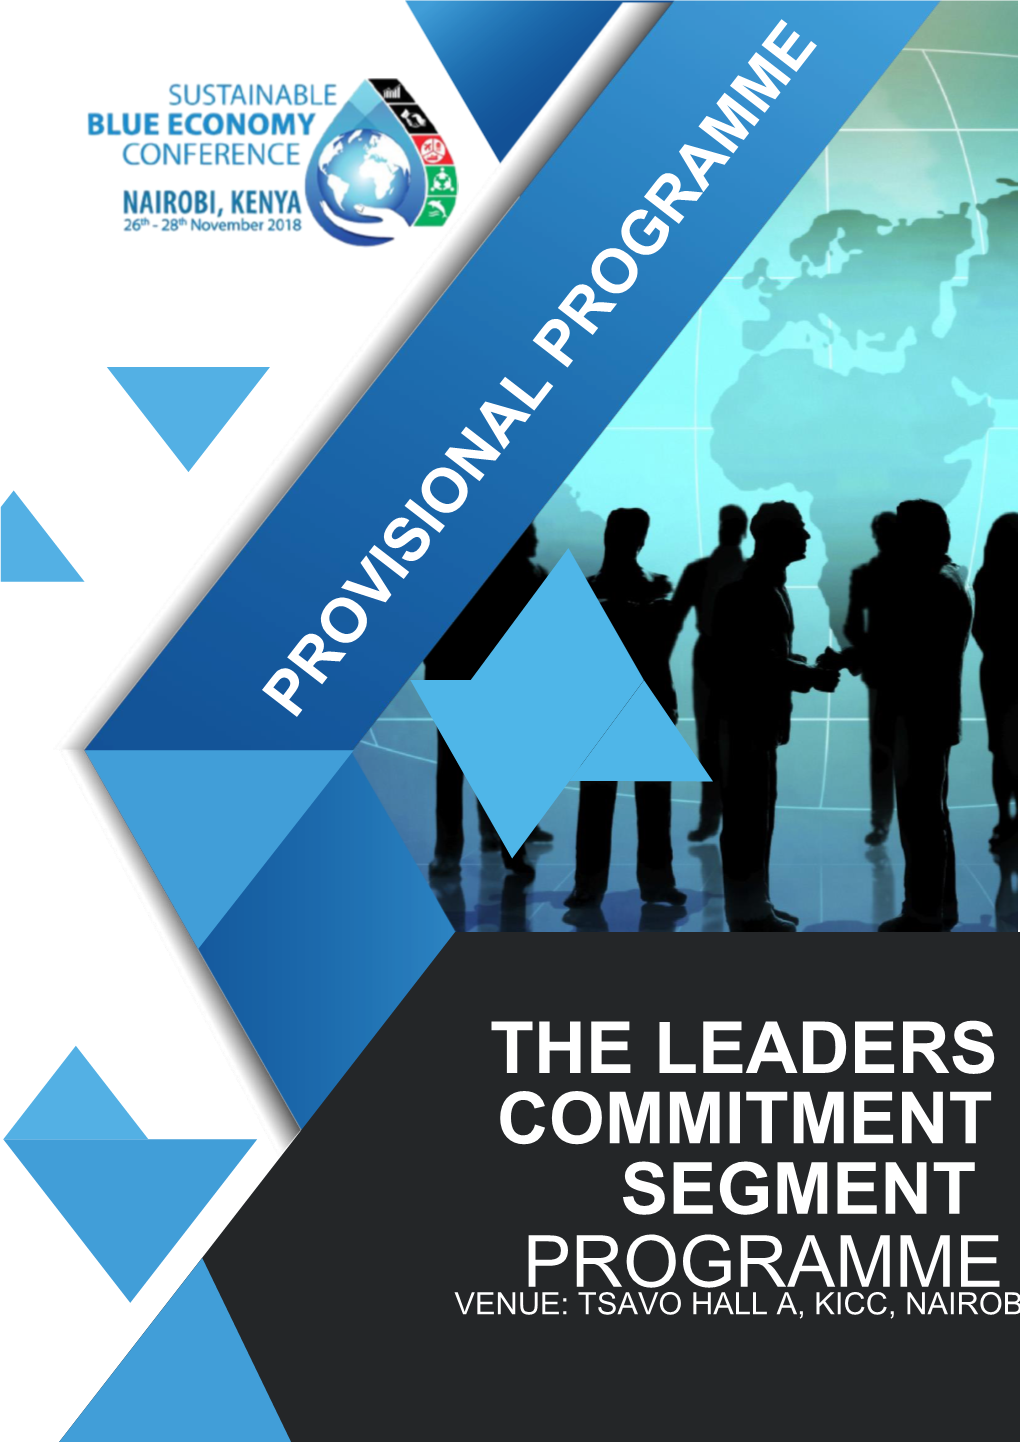 The Leaders Commitment Segment Programme Is Updated Continuously As More Confirmations Are Received